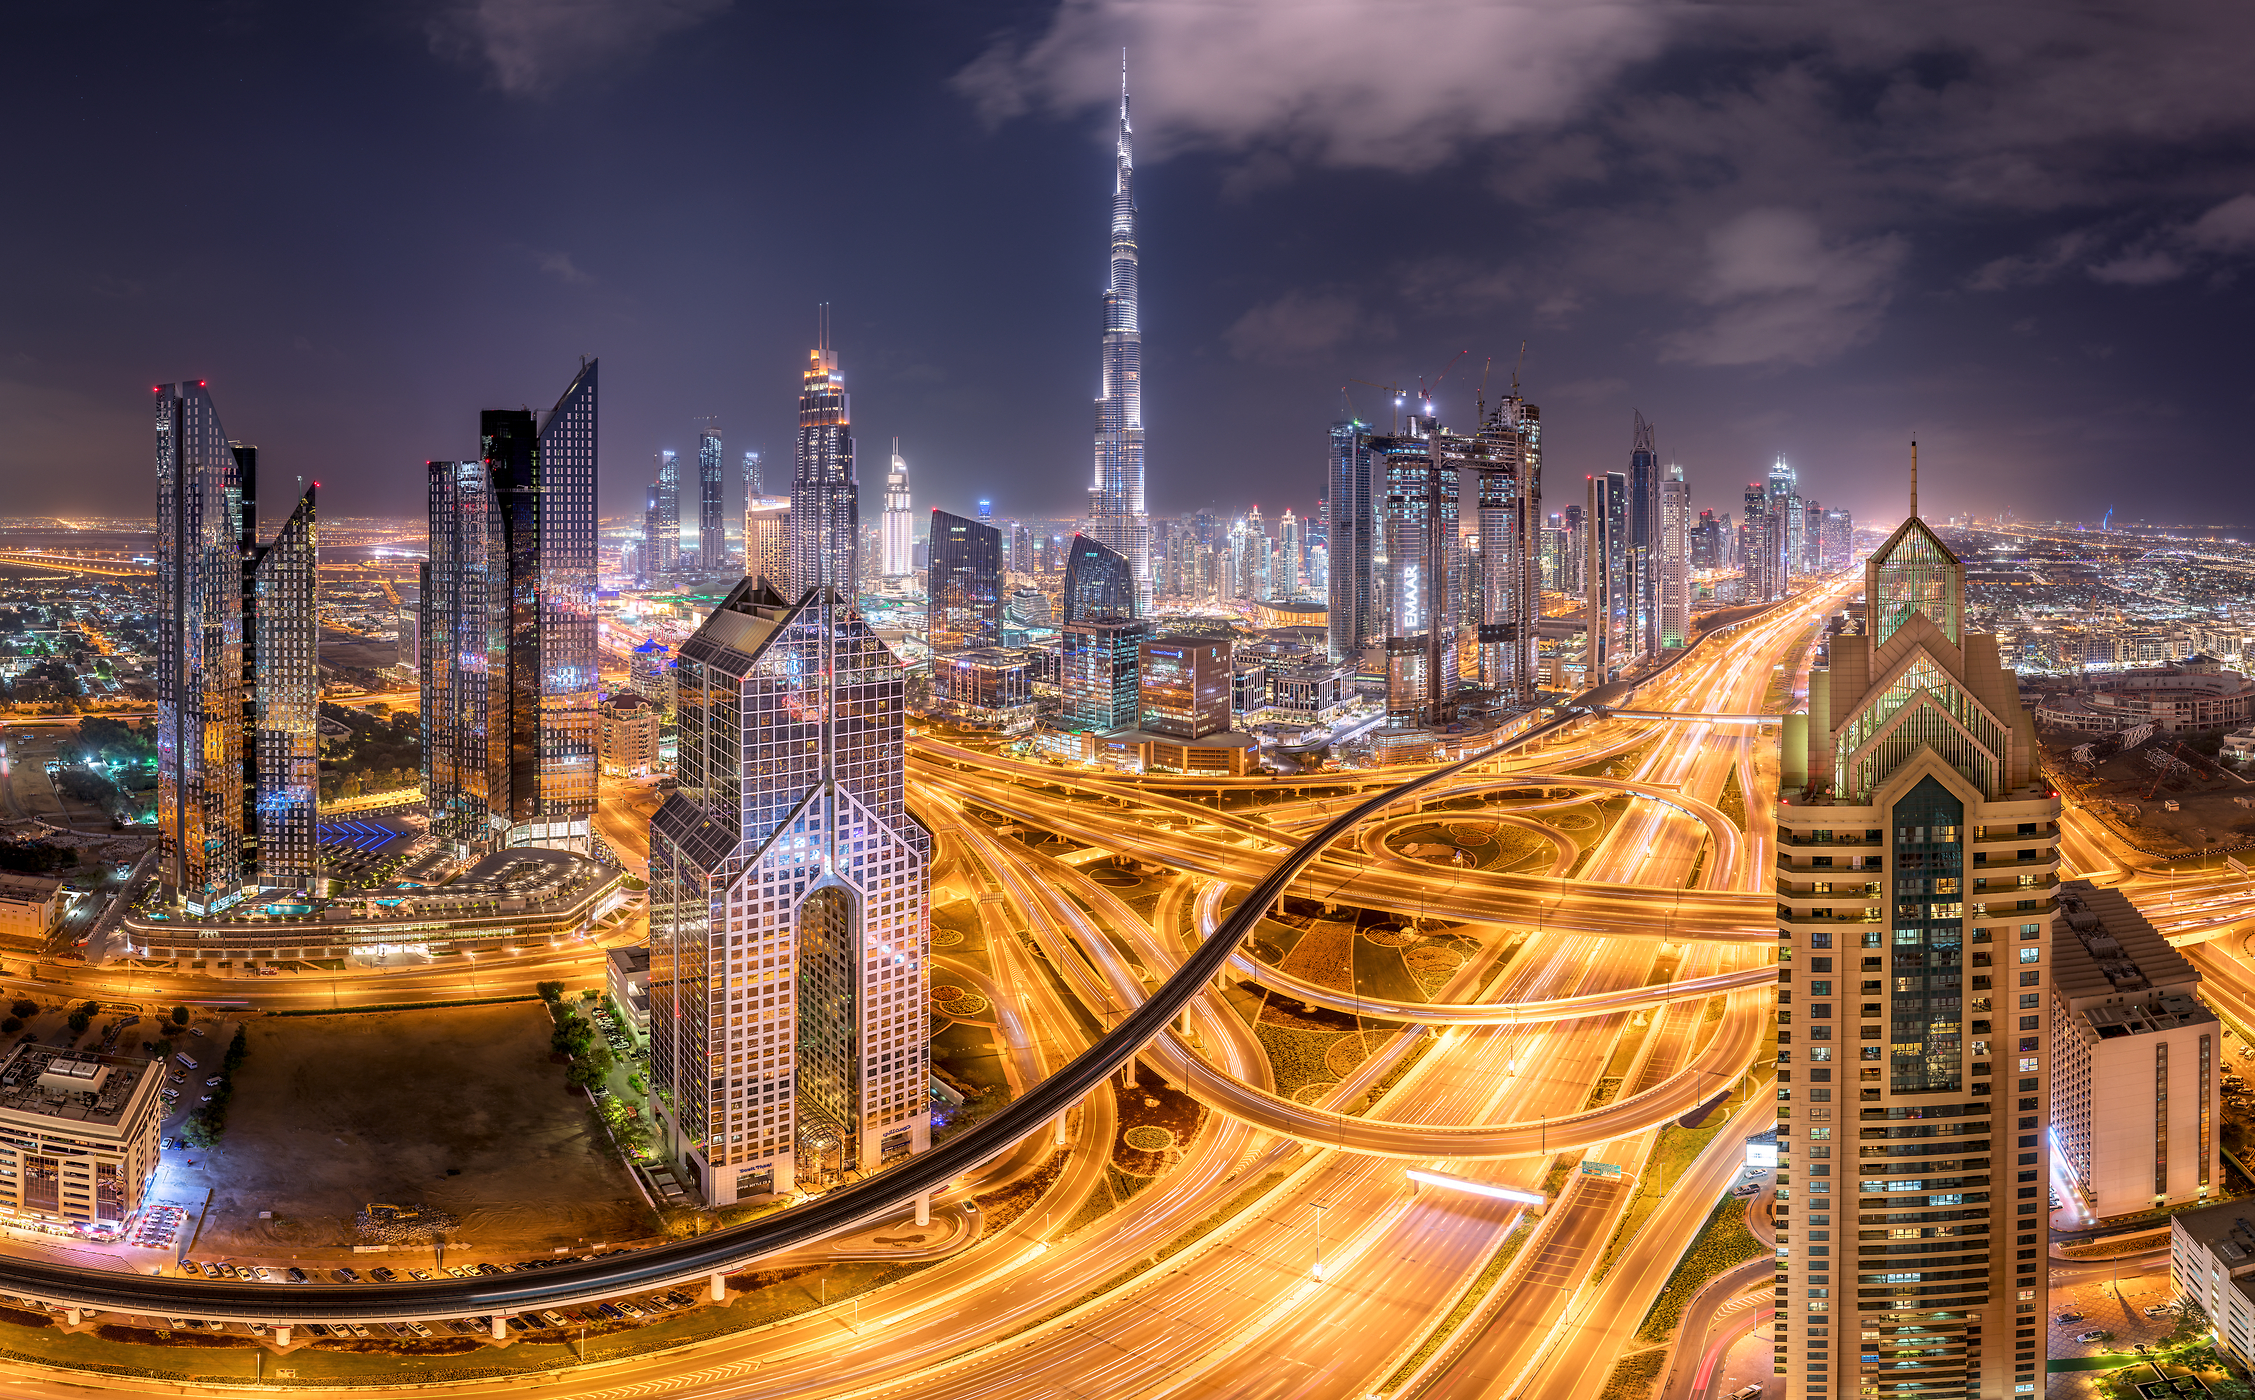 505 megapixels! A very high resolution, large-format VAST photo of the Dubai skyline and roads at night with the Burj Khalifa; fine art cityscape photograph created by Tim Shields in the United Arab Emirates